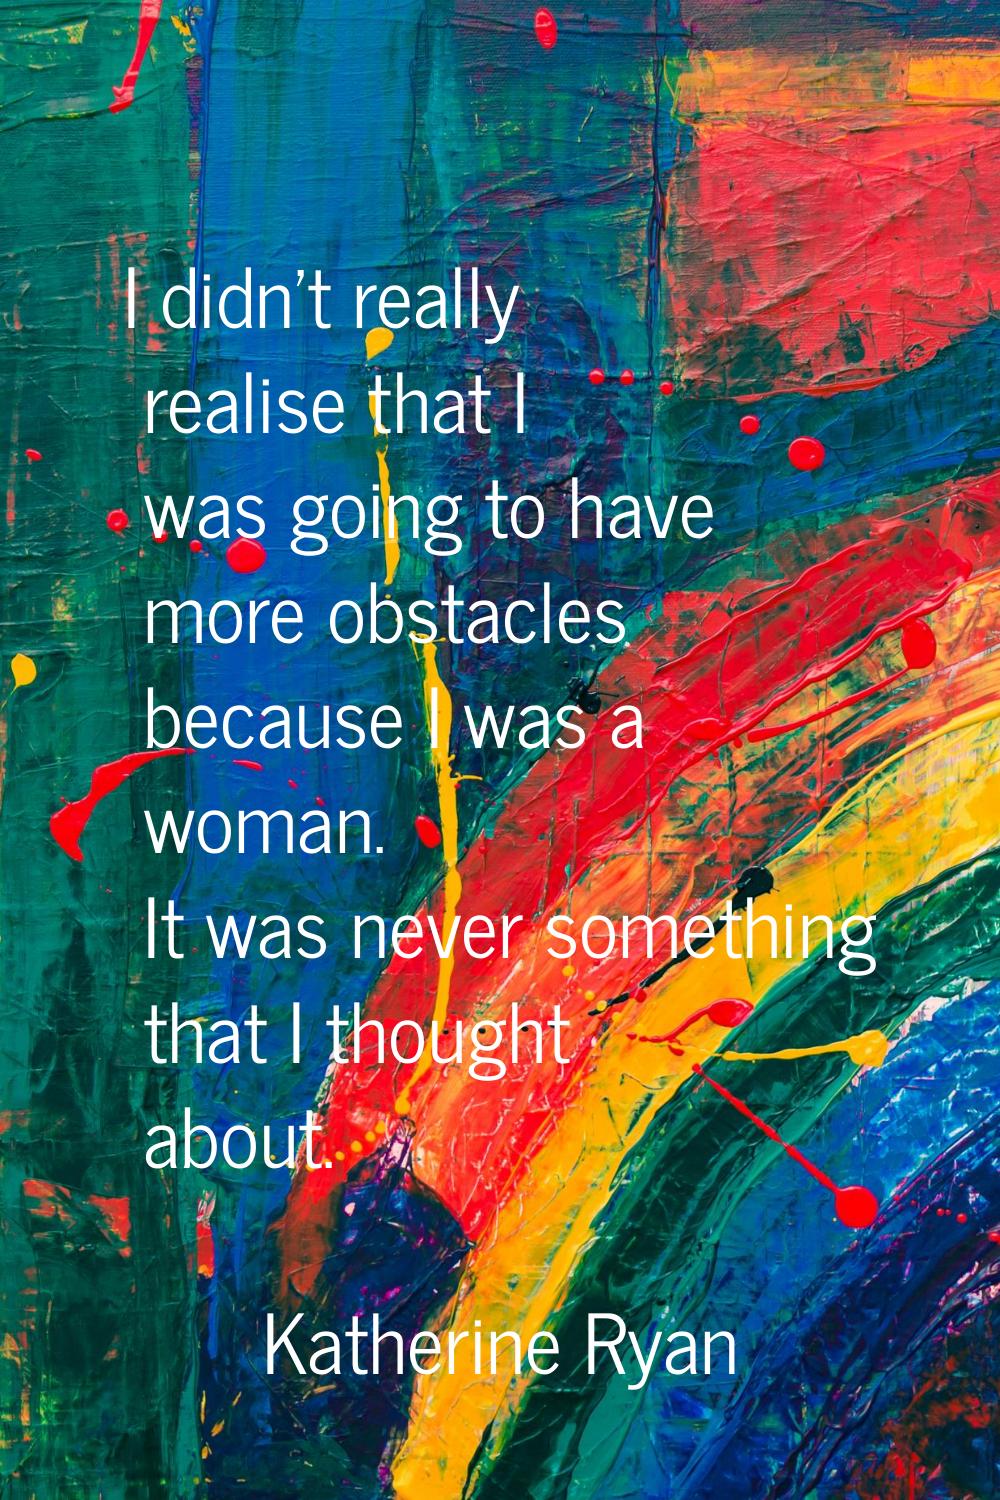 I didn't really realise that I was going to have more obstacles because I was a woman. It was never